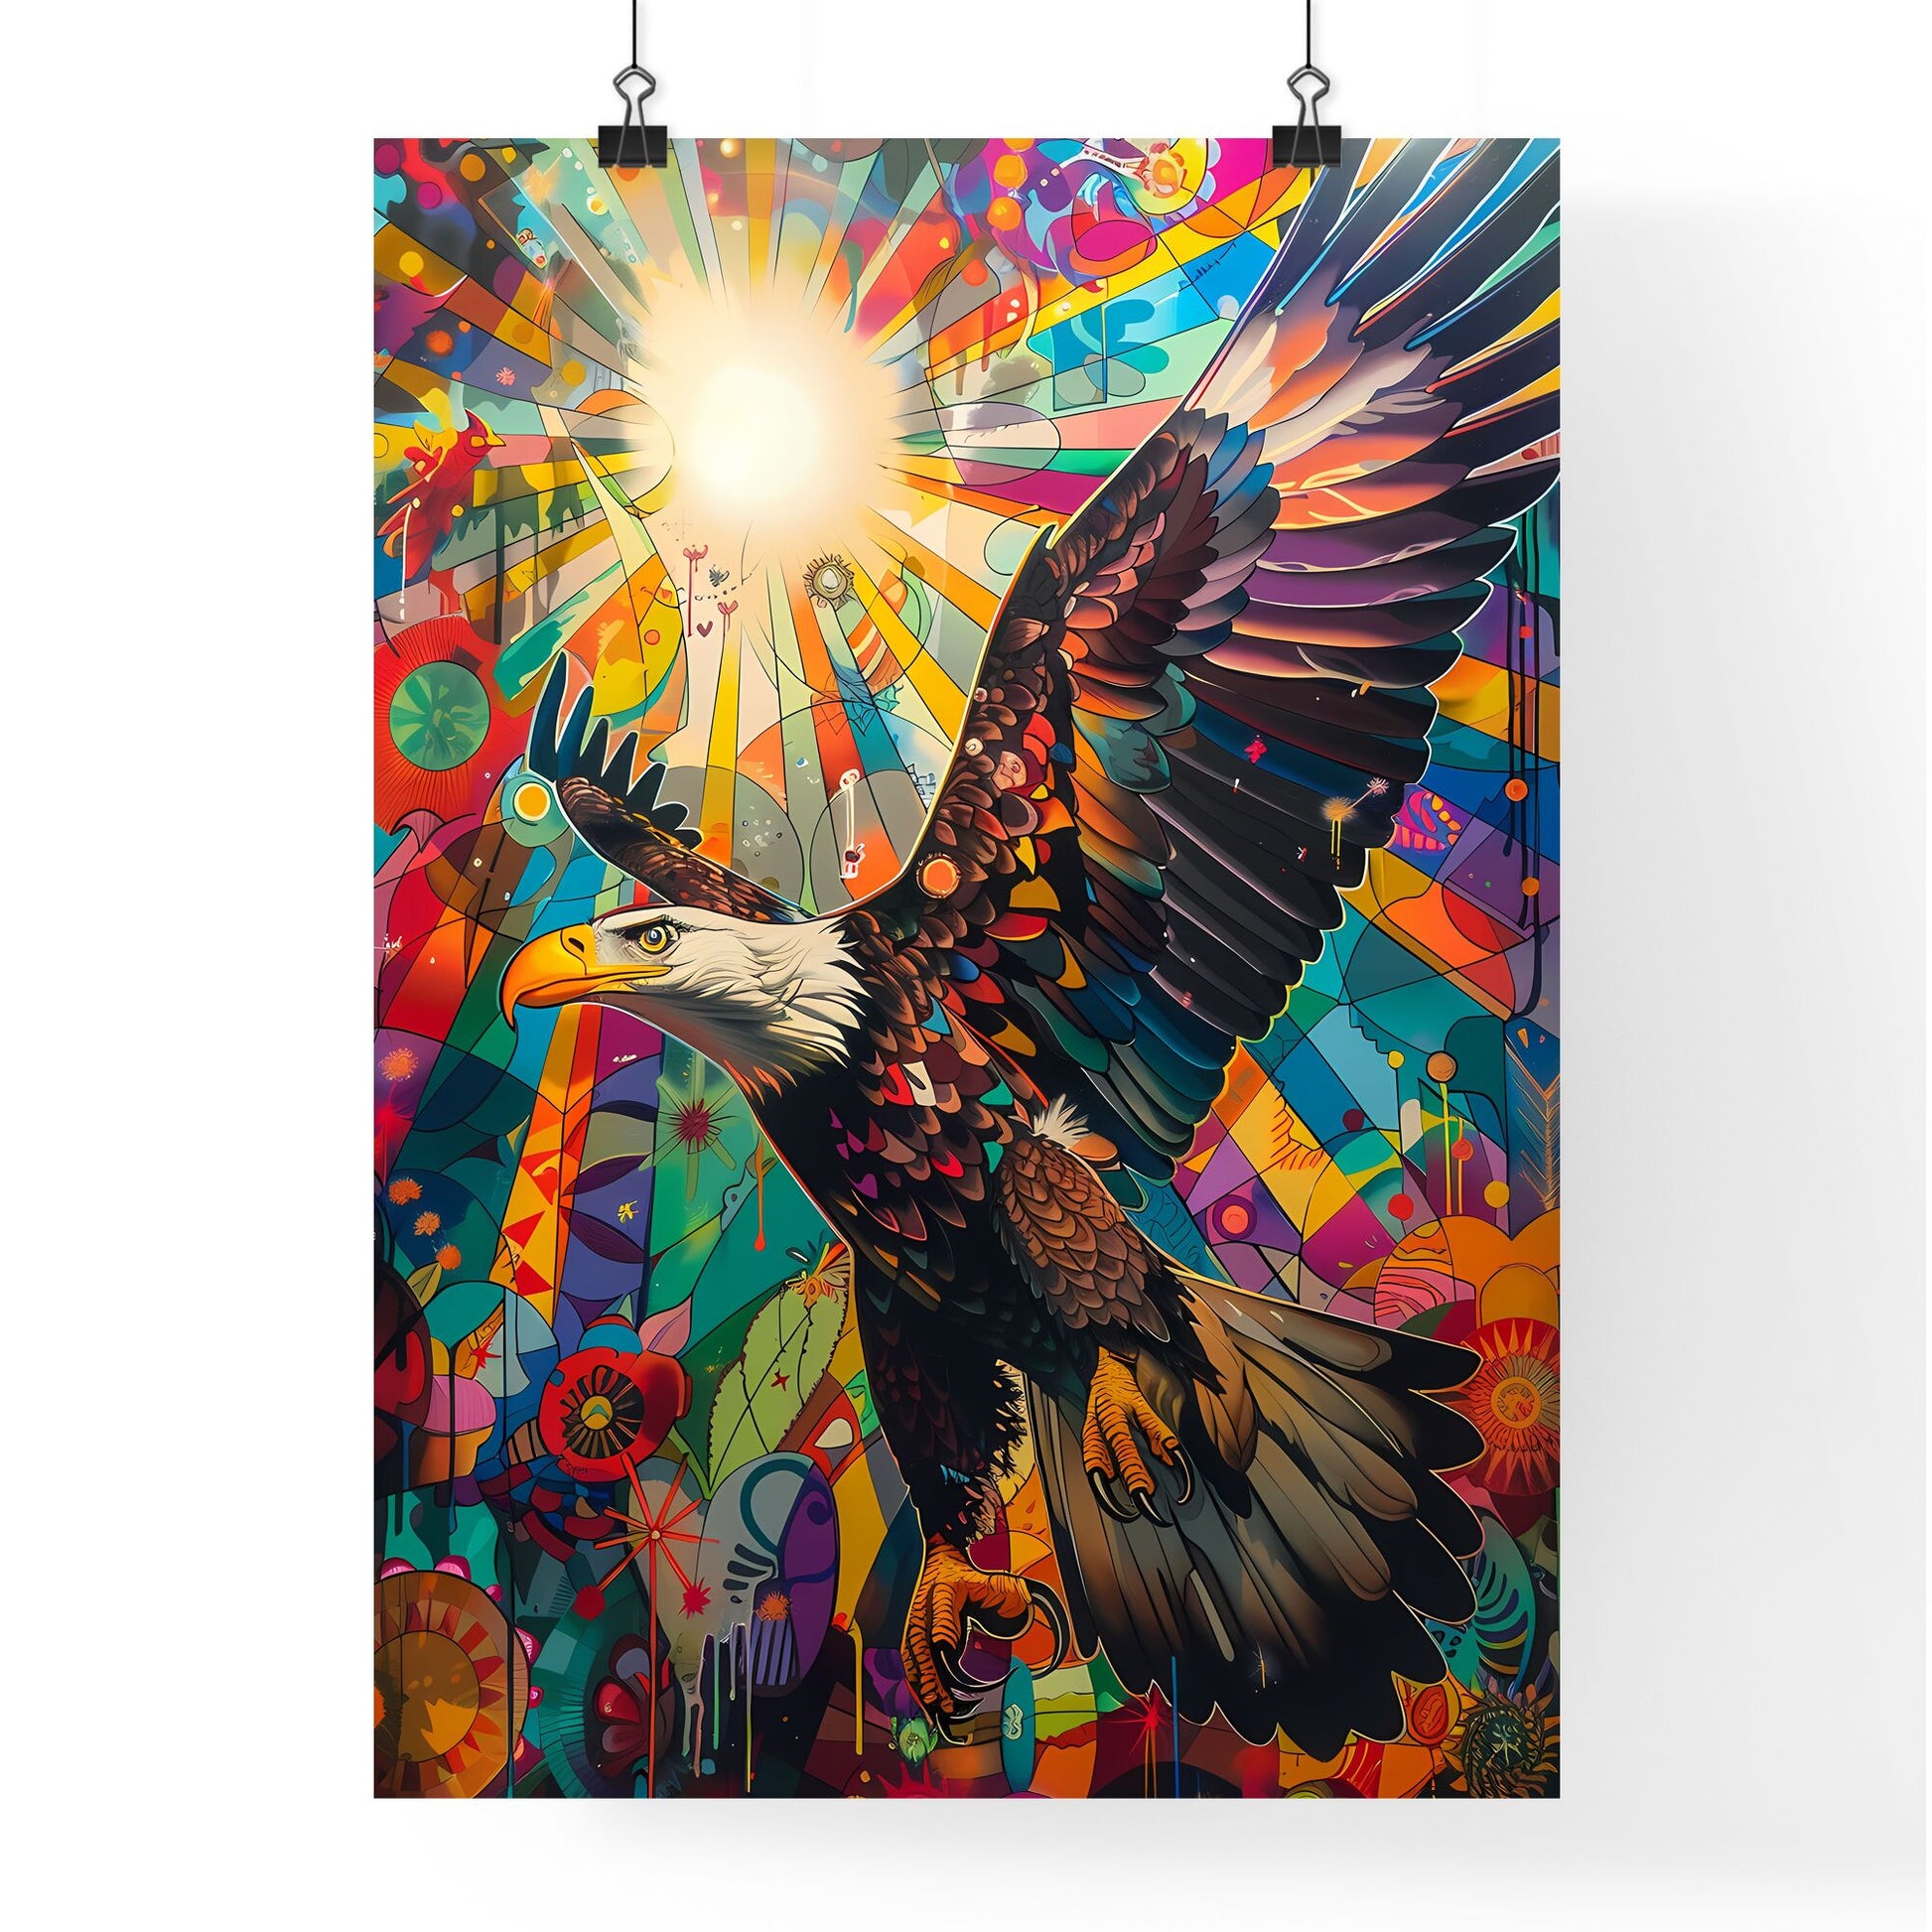 Psychedelic Eagle Painting: Vibrant Pop Art Deco Landscape with Sunlight and Stained Glass Elements Default Title